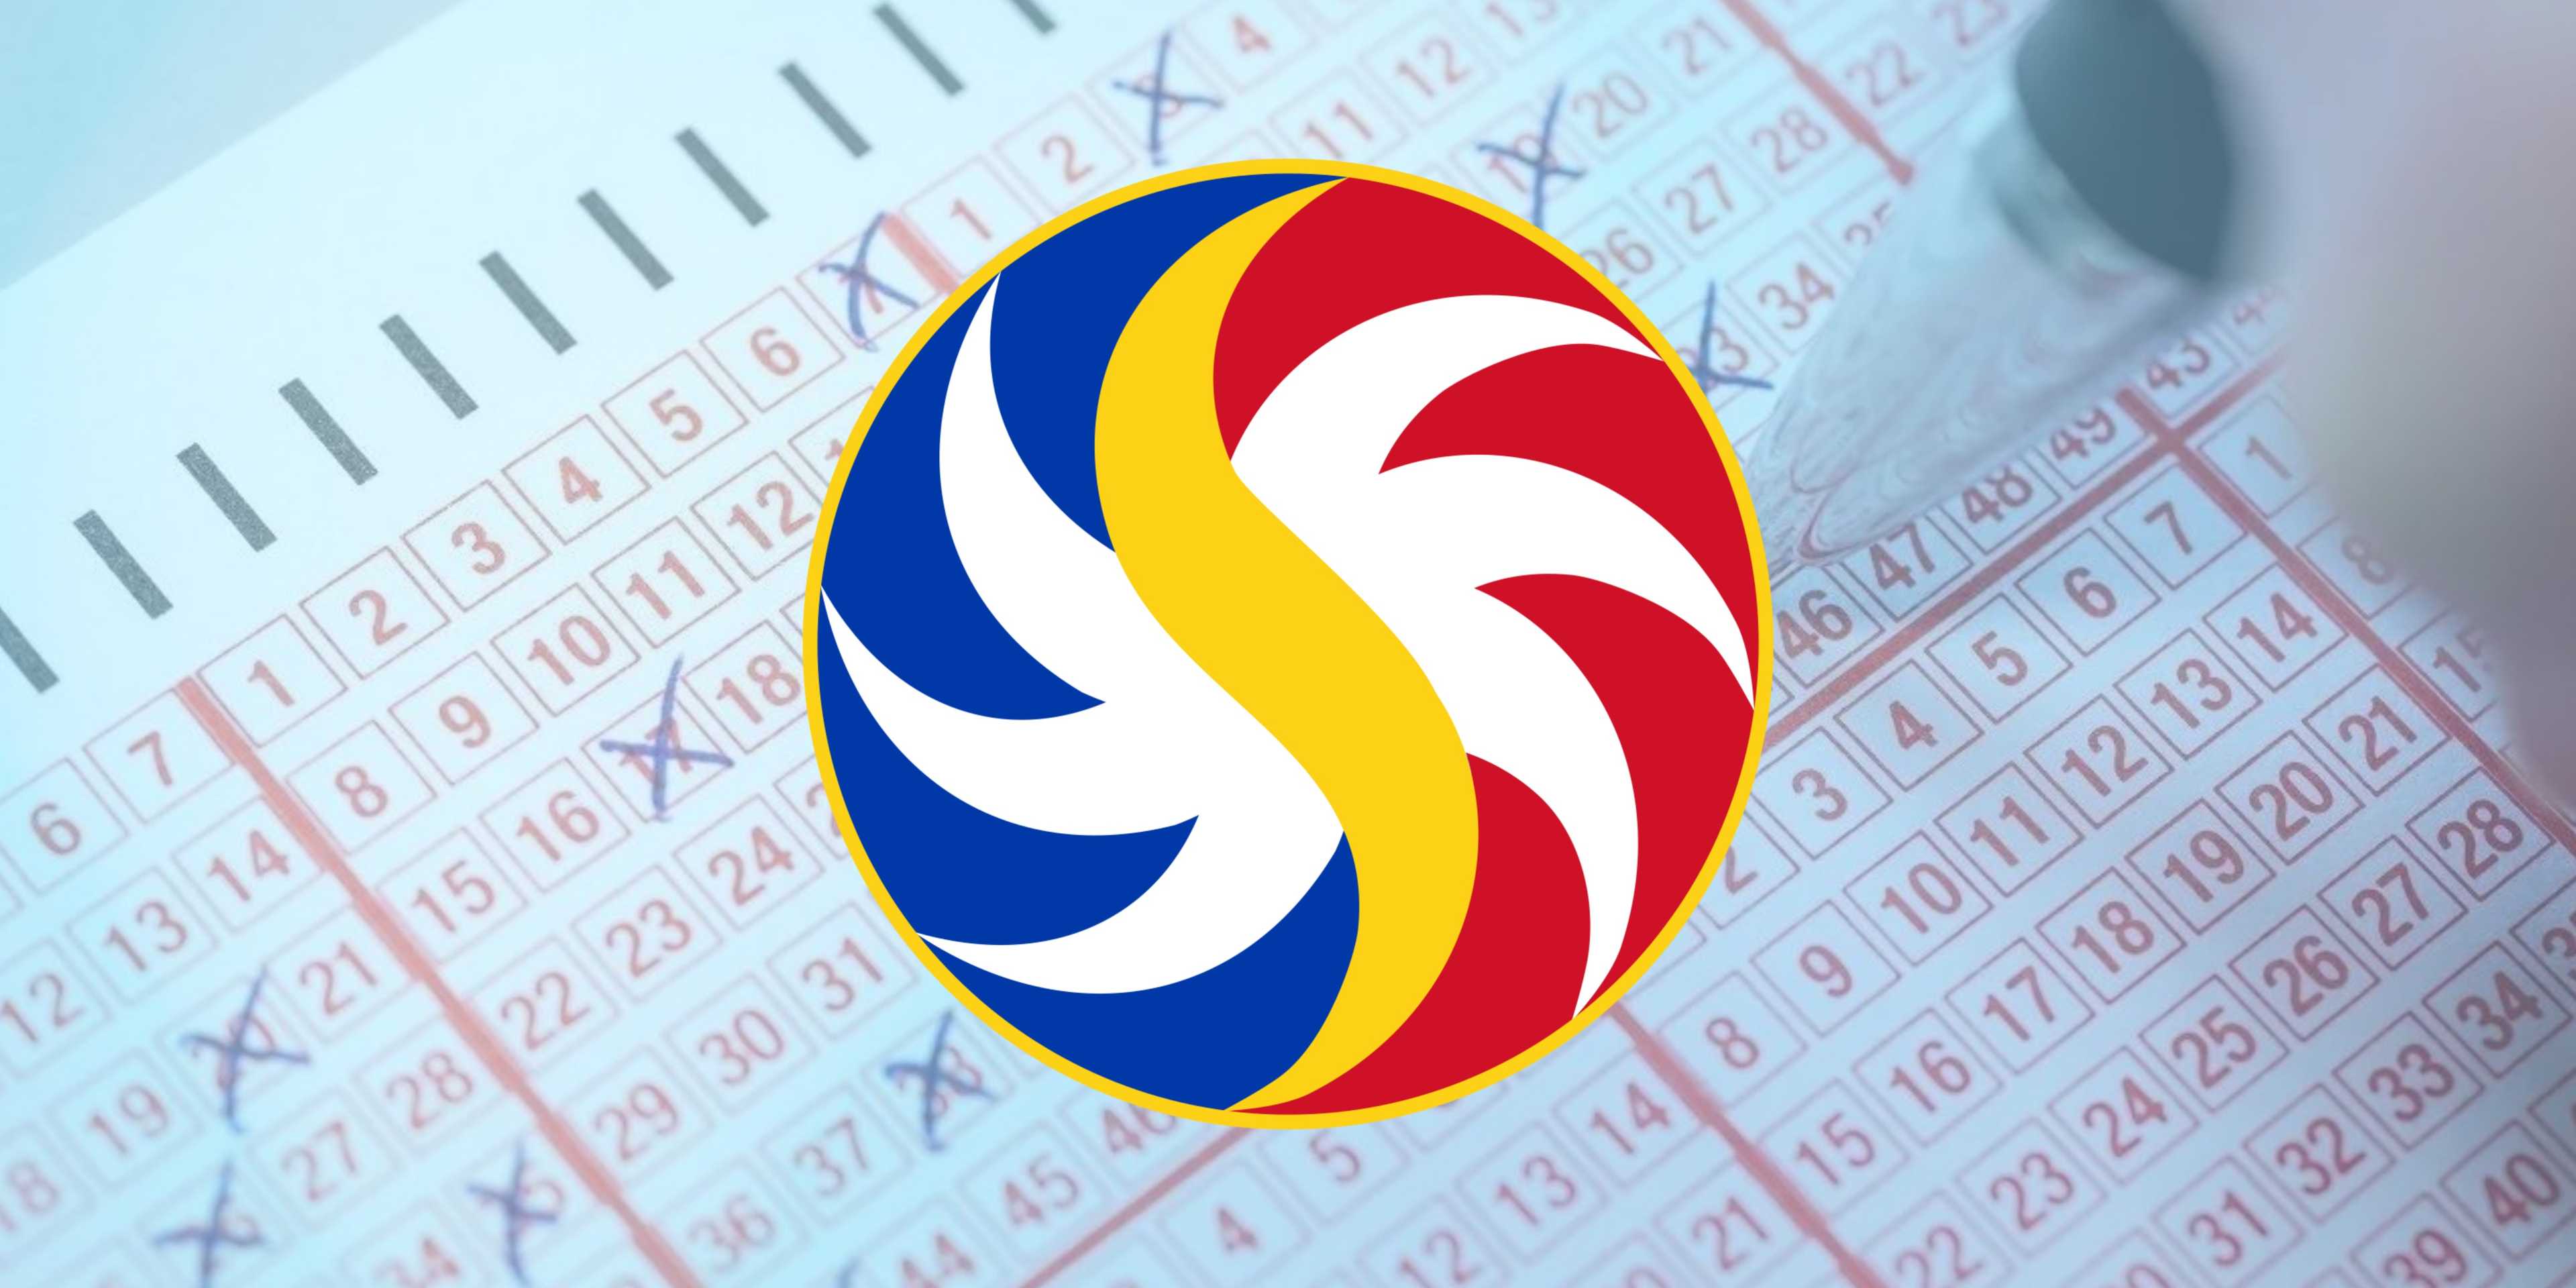 PCSO Lotto Draw Results on Monday, February 19